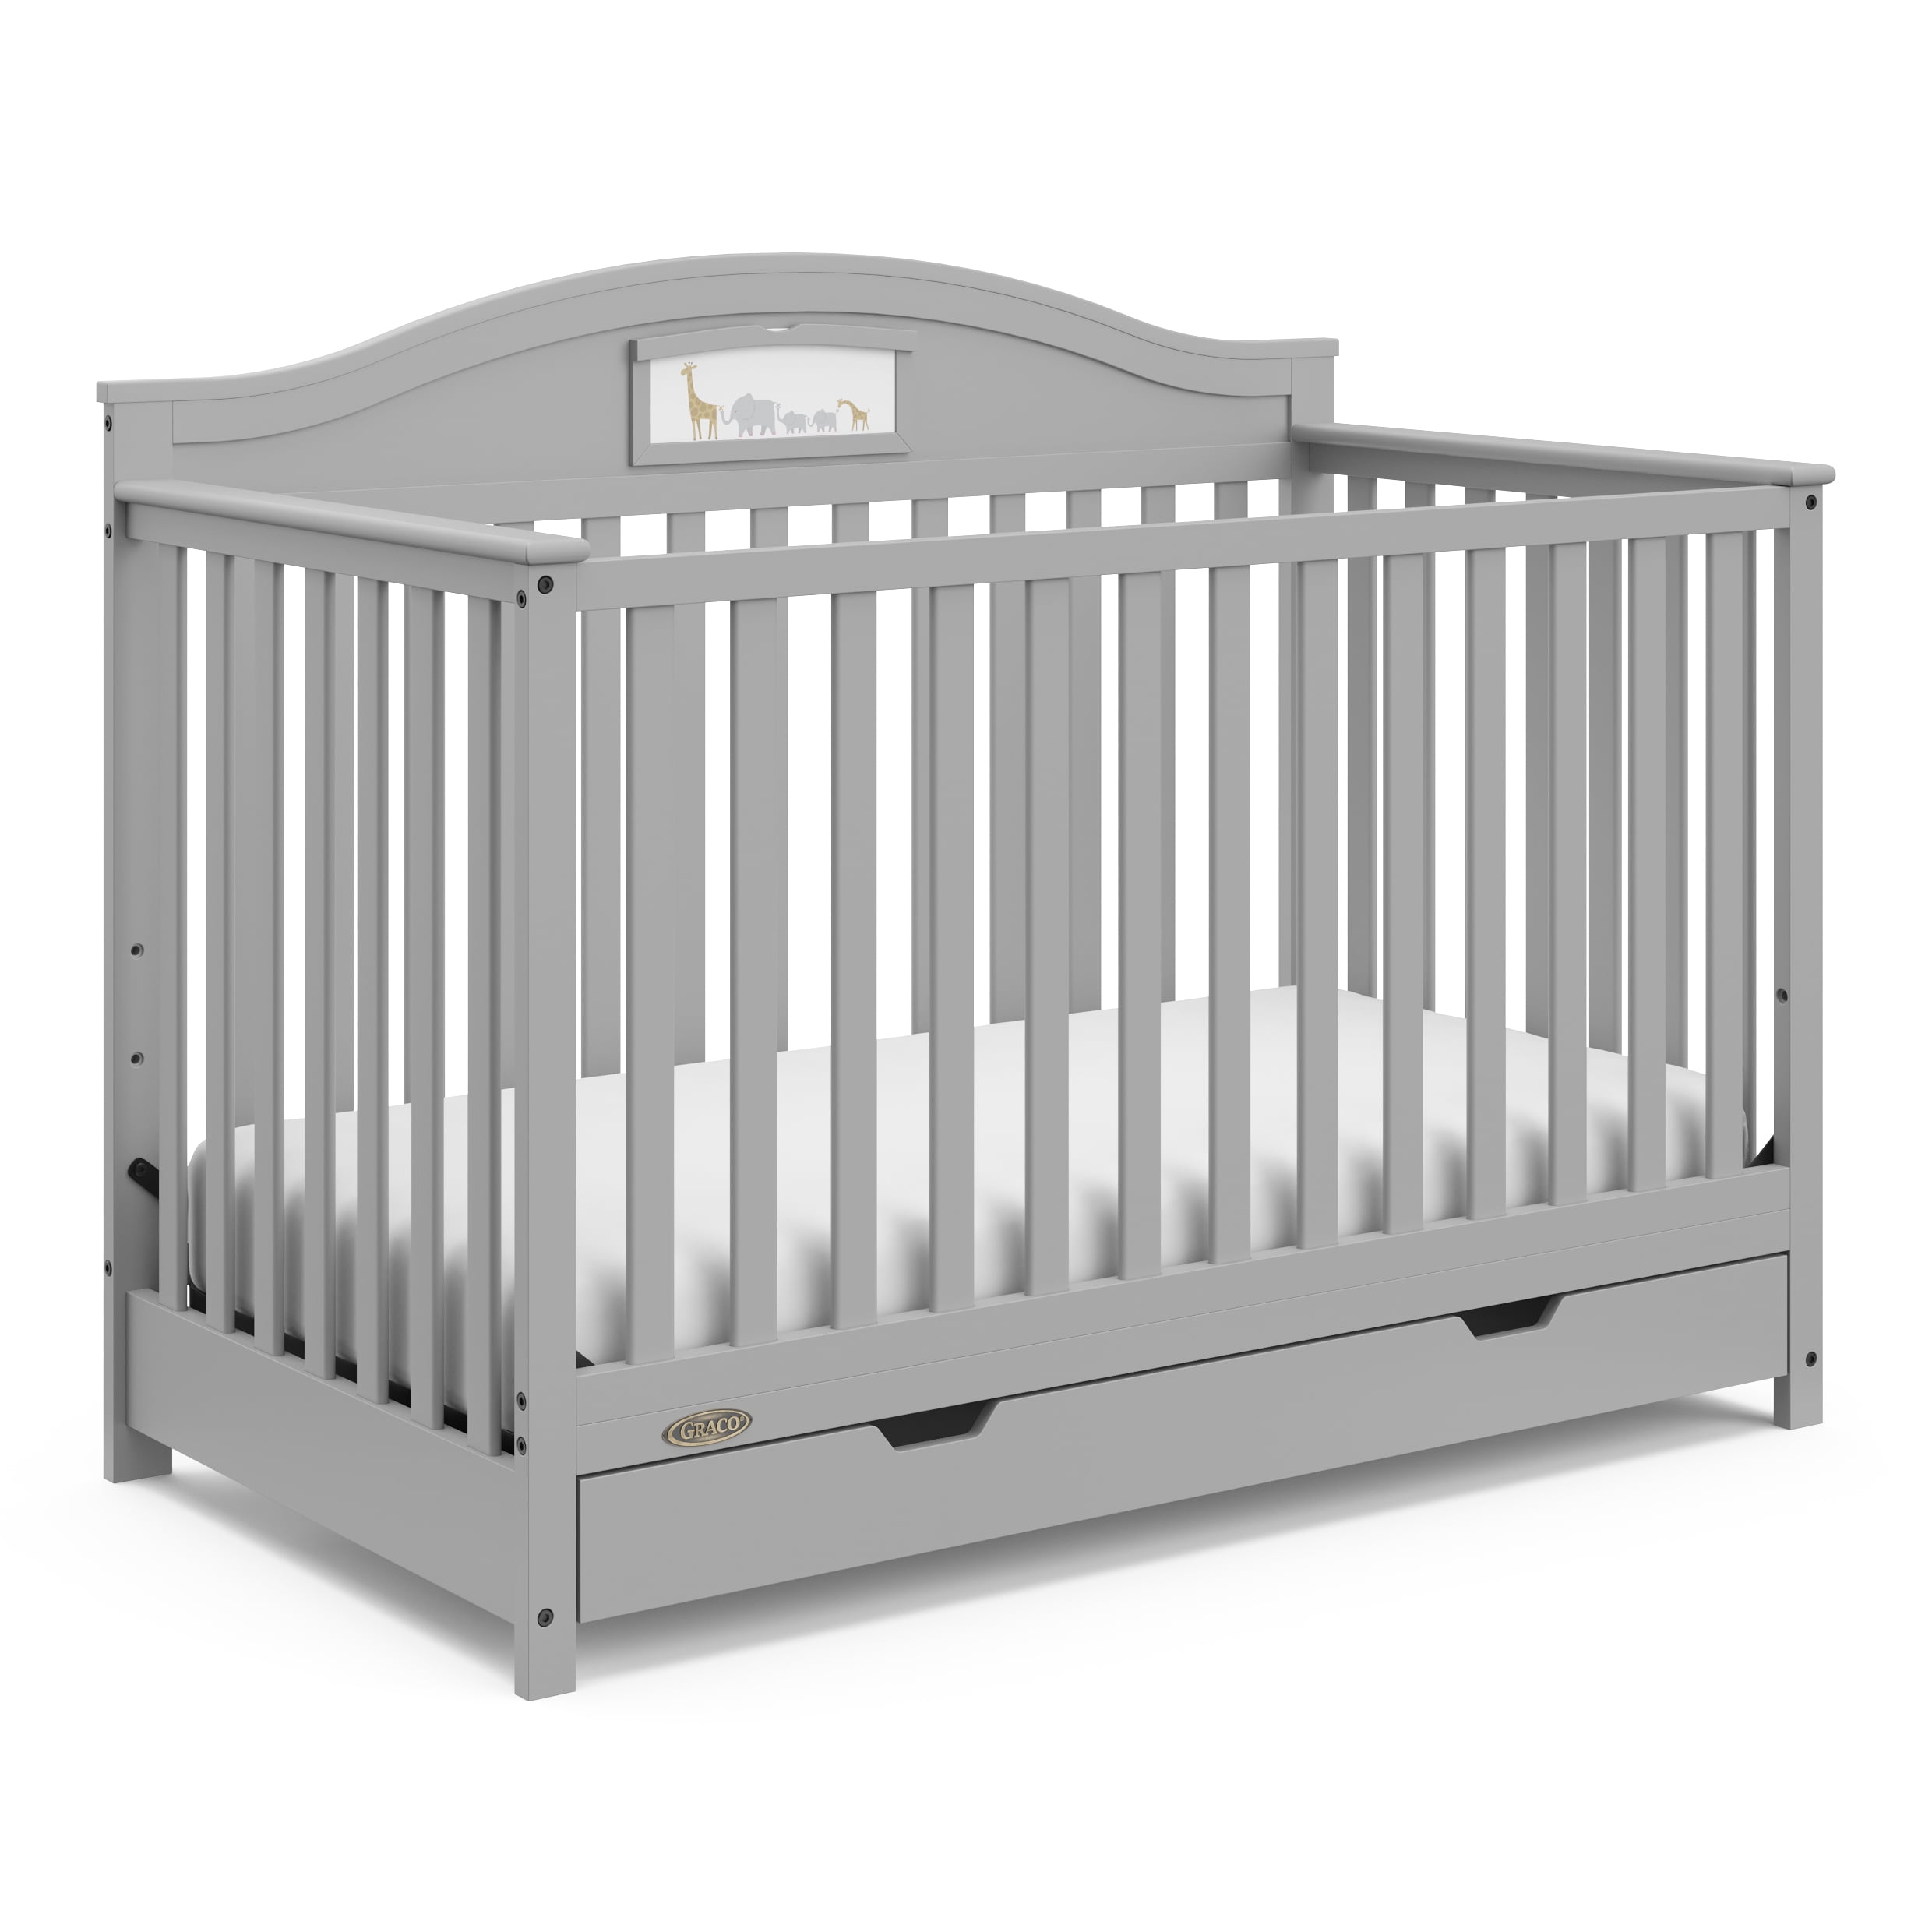 Graco Story 5-in-1 Convertible Baby Crib with Drawer, Pebble Gray